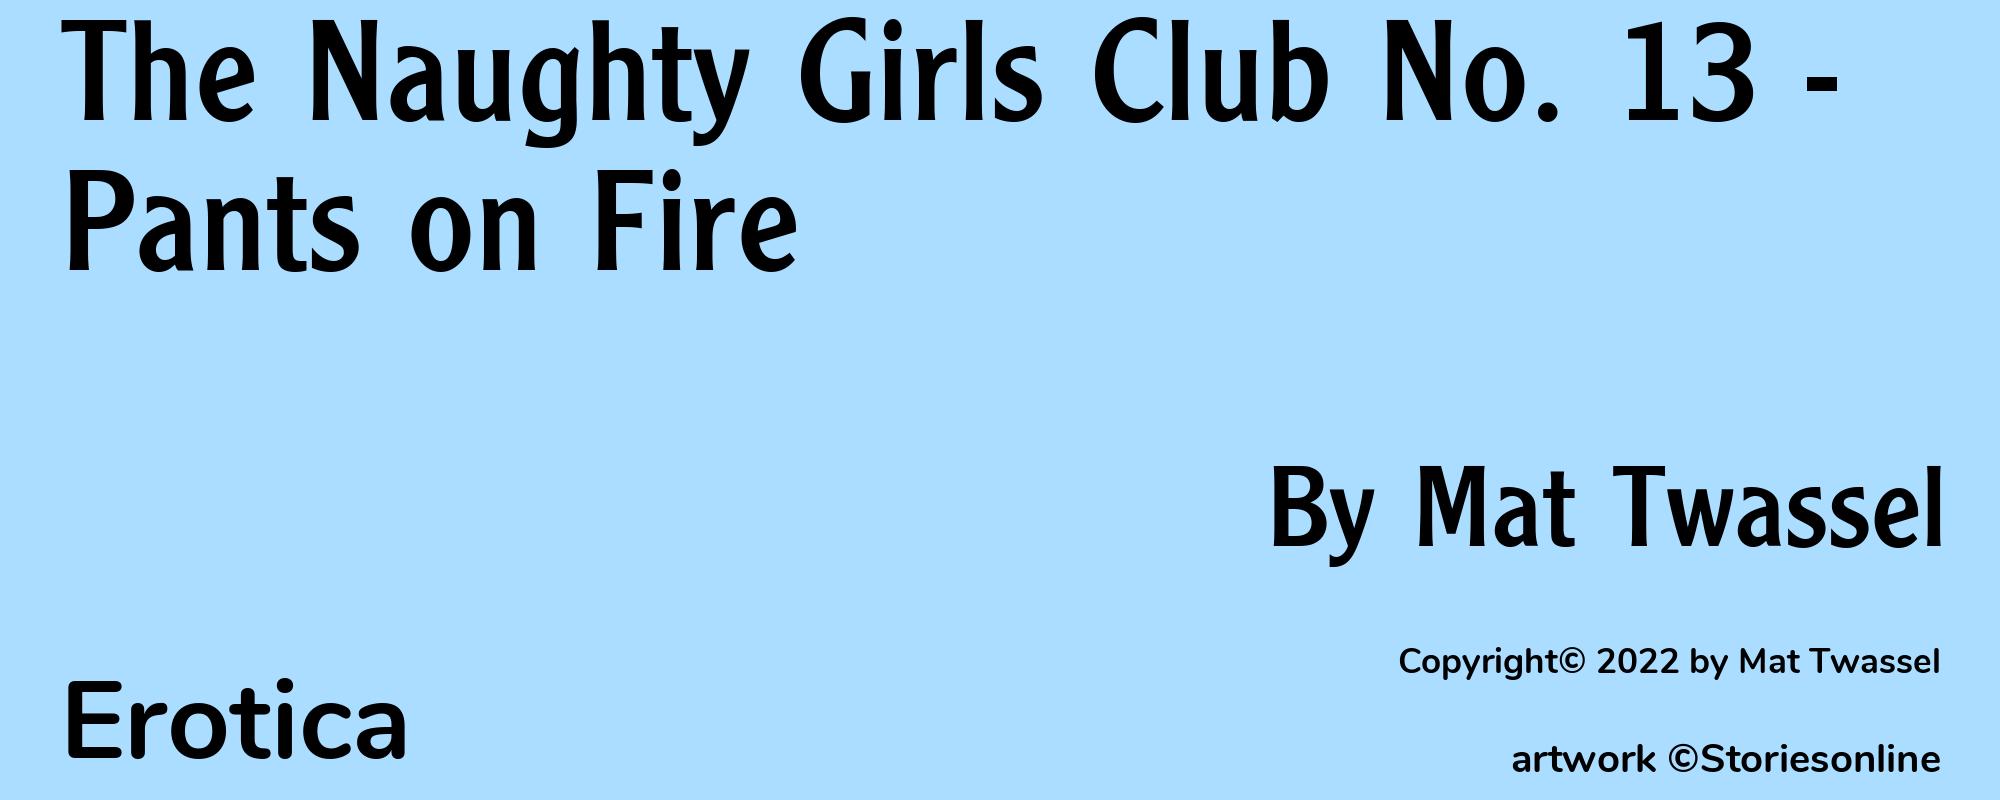 The Naughty Girls Club No. 13 - Pants on Fire - Cover